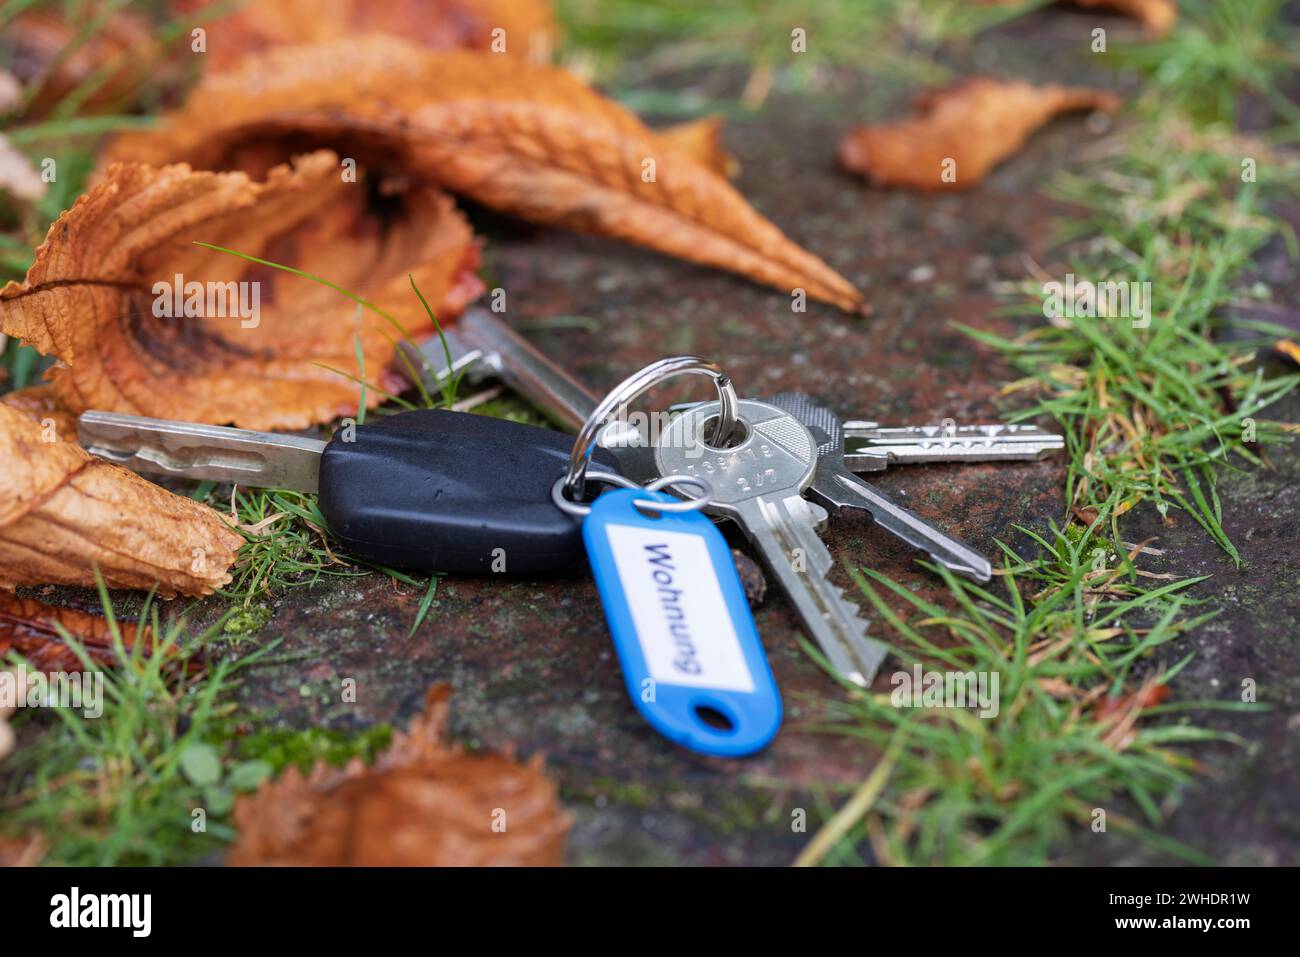 Lost bunch of keys with car keys on the side of the road, blue key ring with lettering ëapartmentë, autumn leaves, symbolic picture, lost keys, Stock Photo